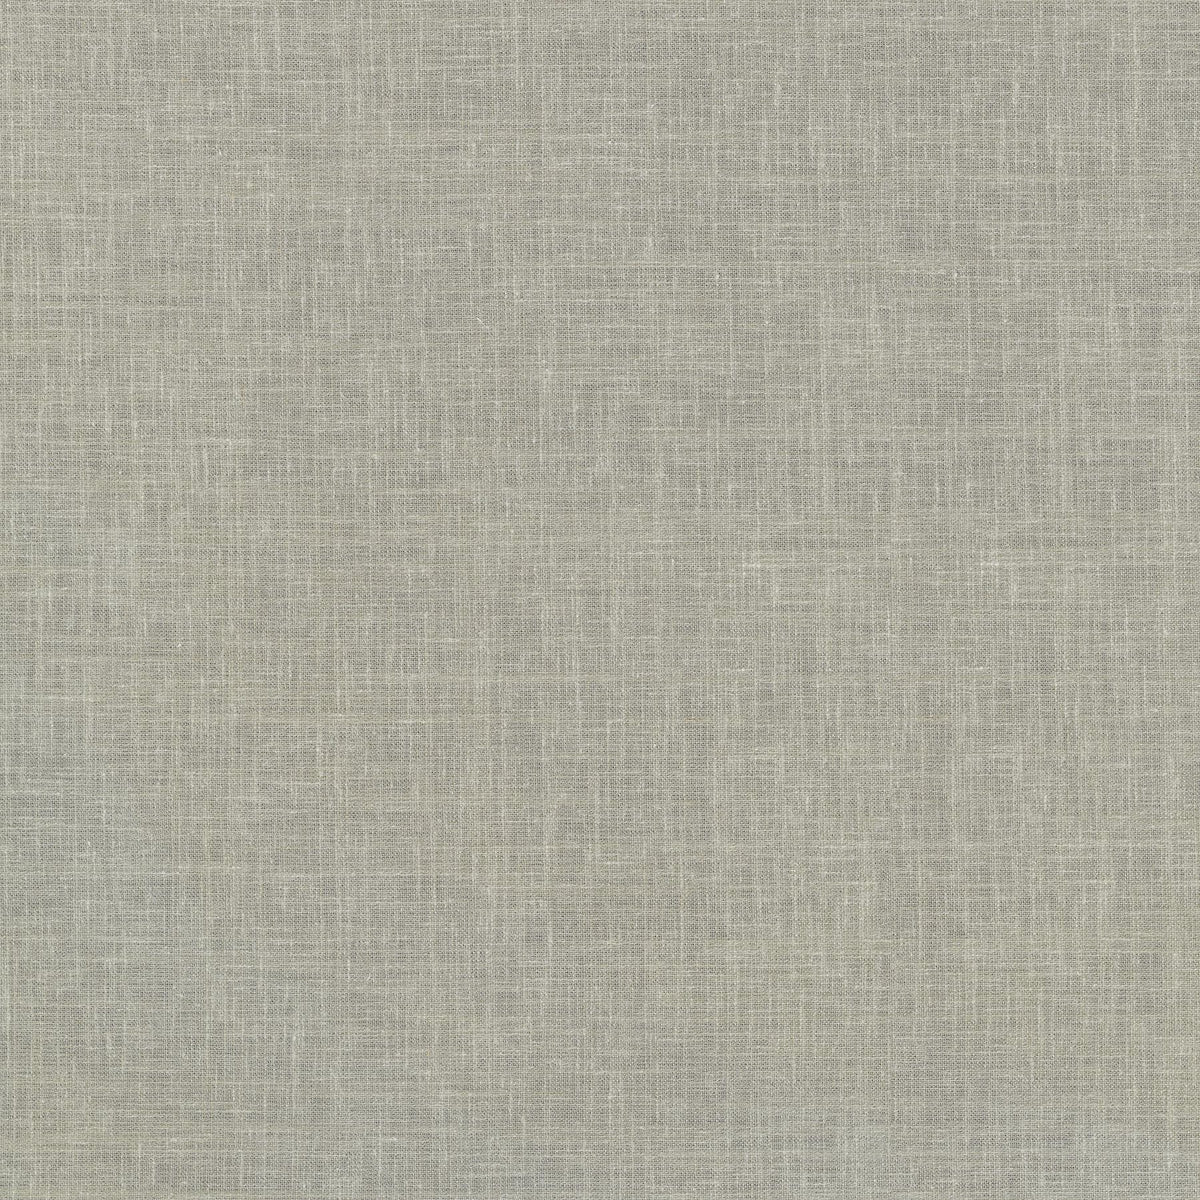 P/K Lifestyles Isabella - Silver 411113 Fabric Swatch